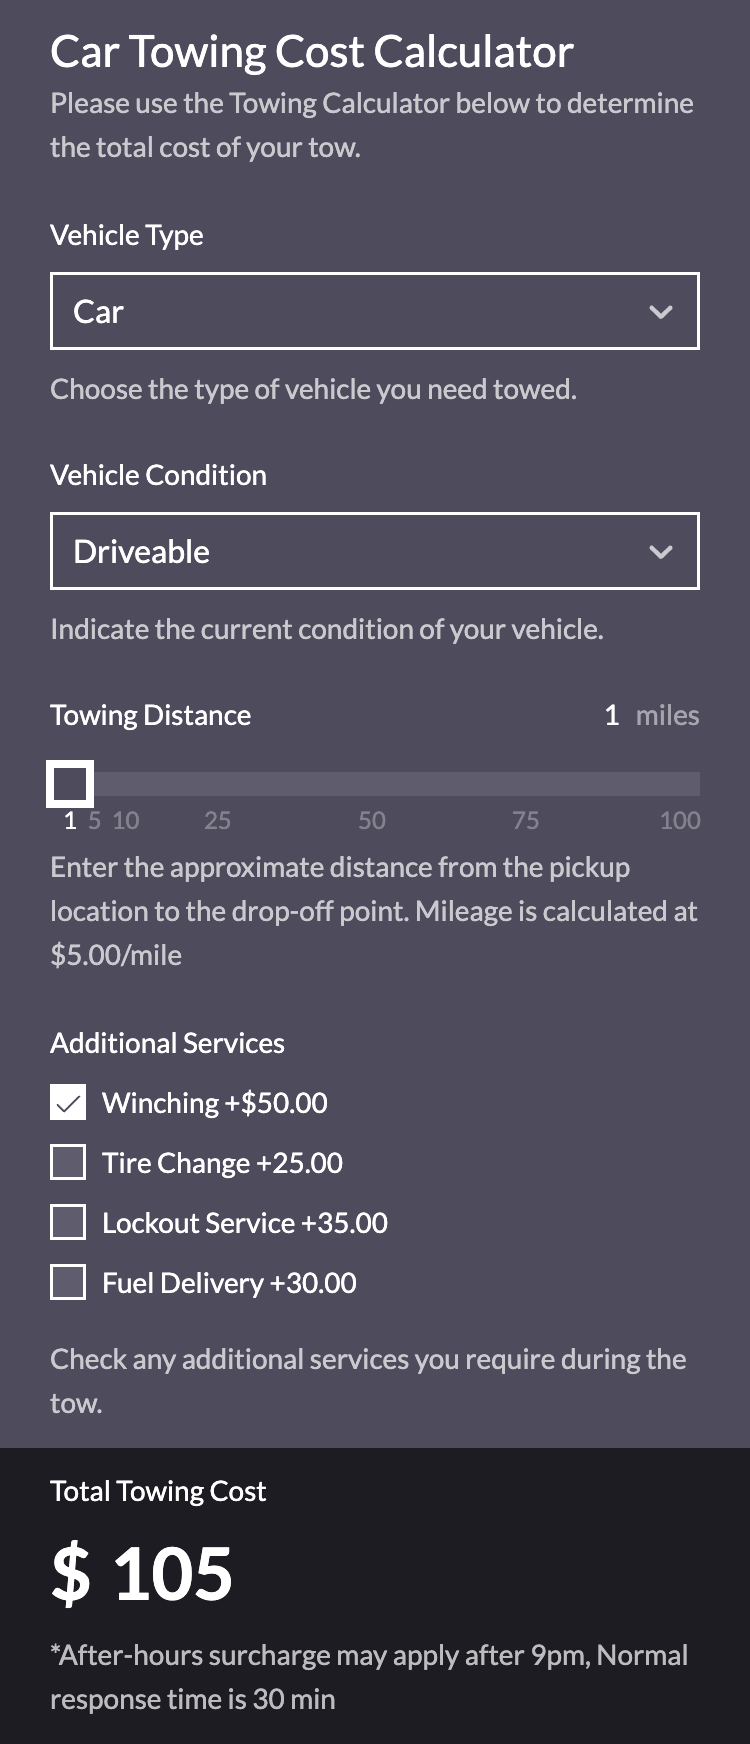 A screenshot of a car towing cost calculator embedded on a towing company's website, showcasing input fields for vehicle type, distance, and additional services